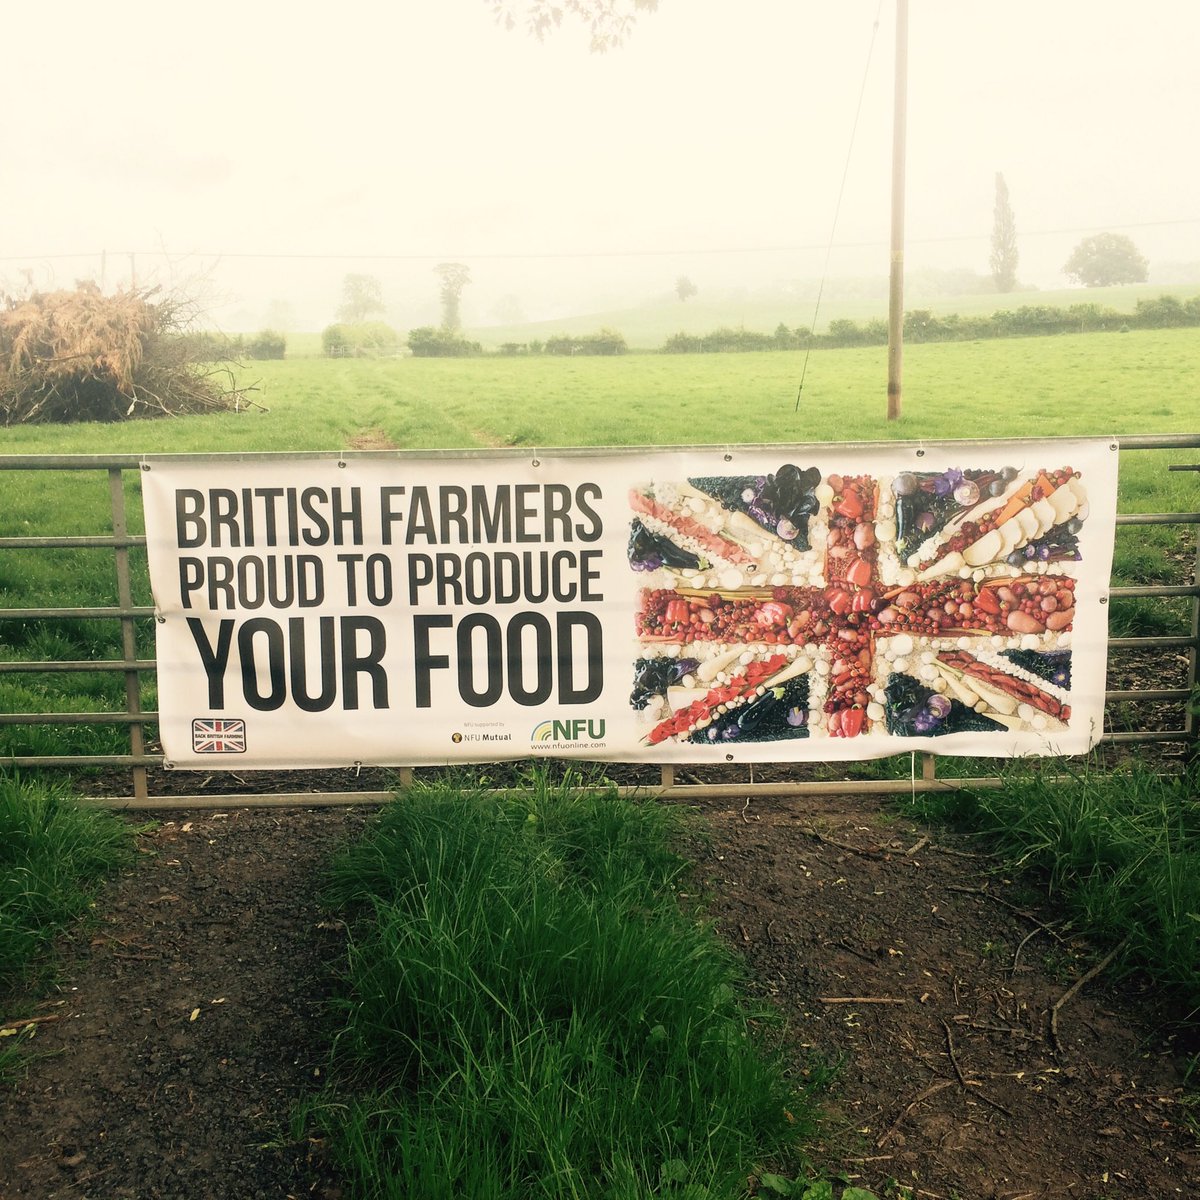 Just put the new sign up 🇬🇧@NFUtweets #backbritish #farming #campaign #shropshire